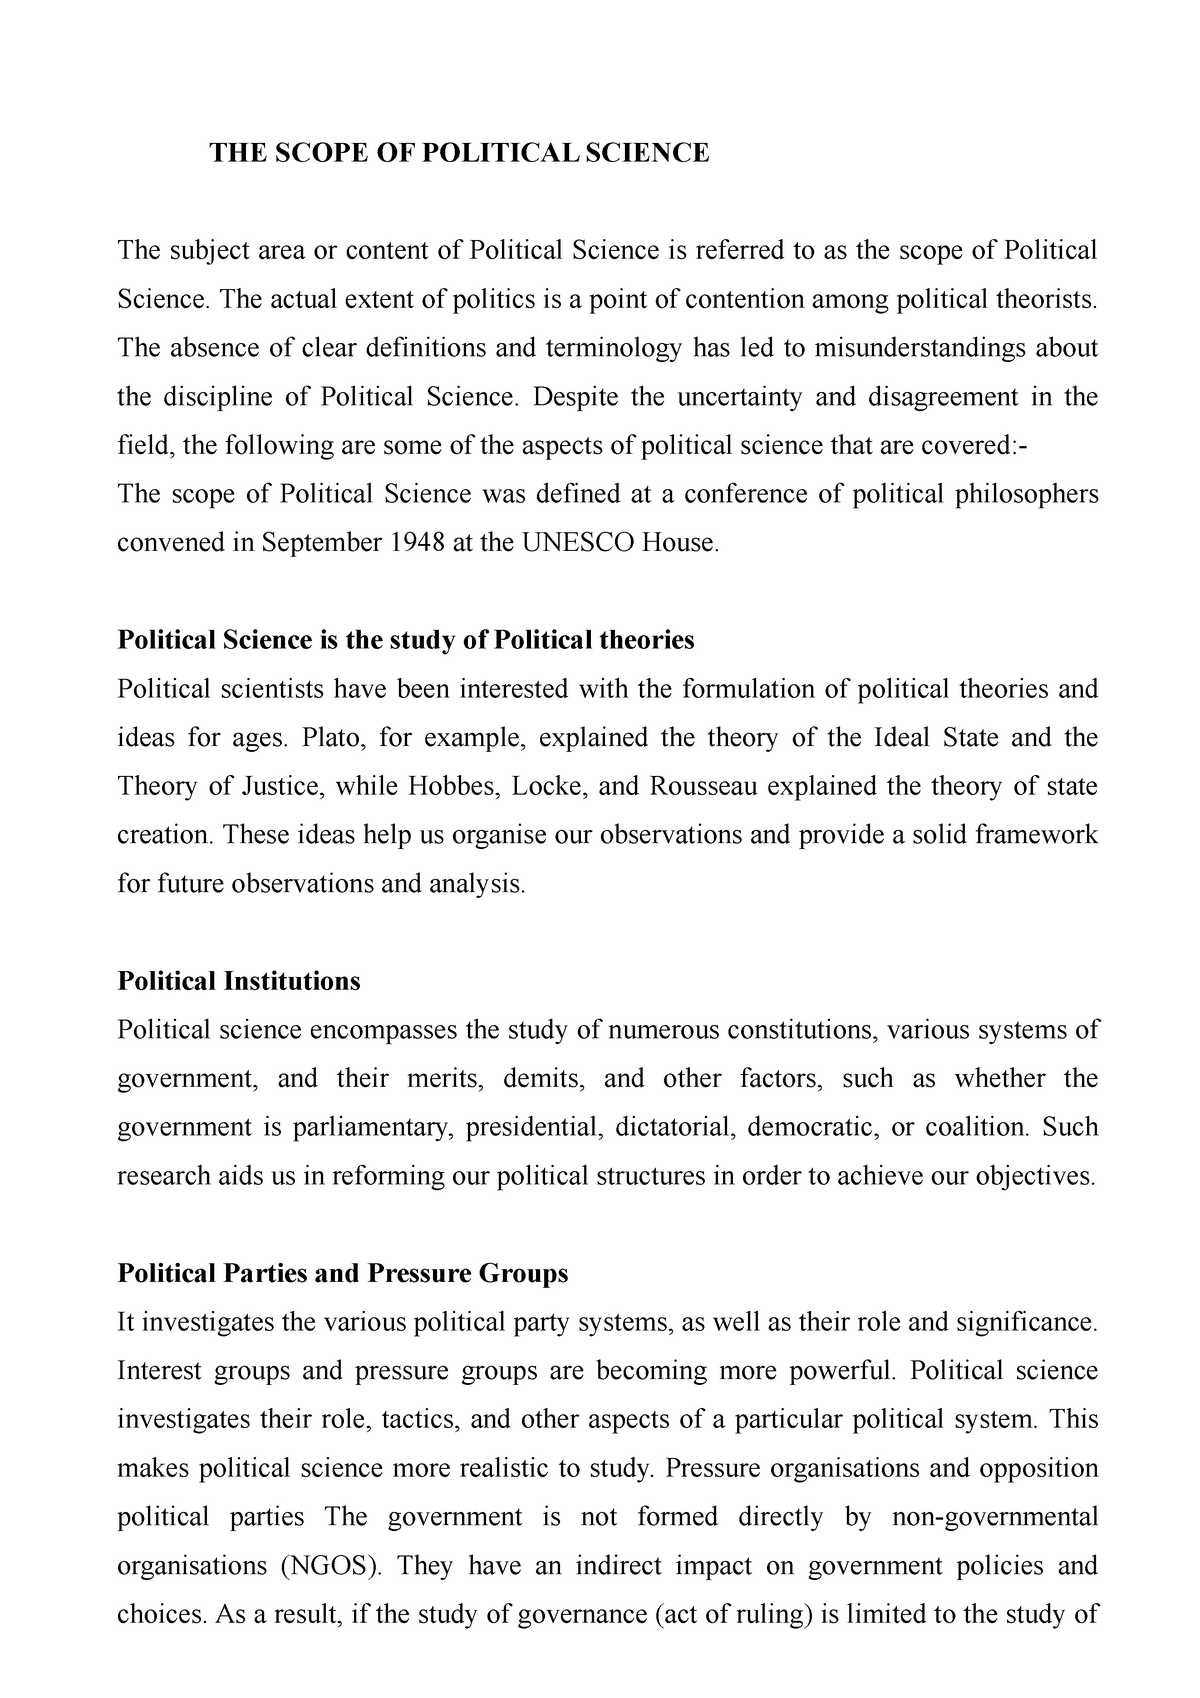 dissertation on political science